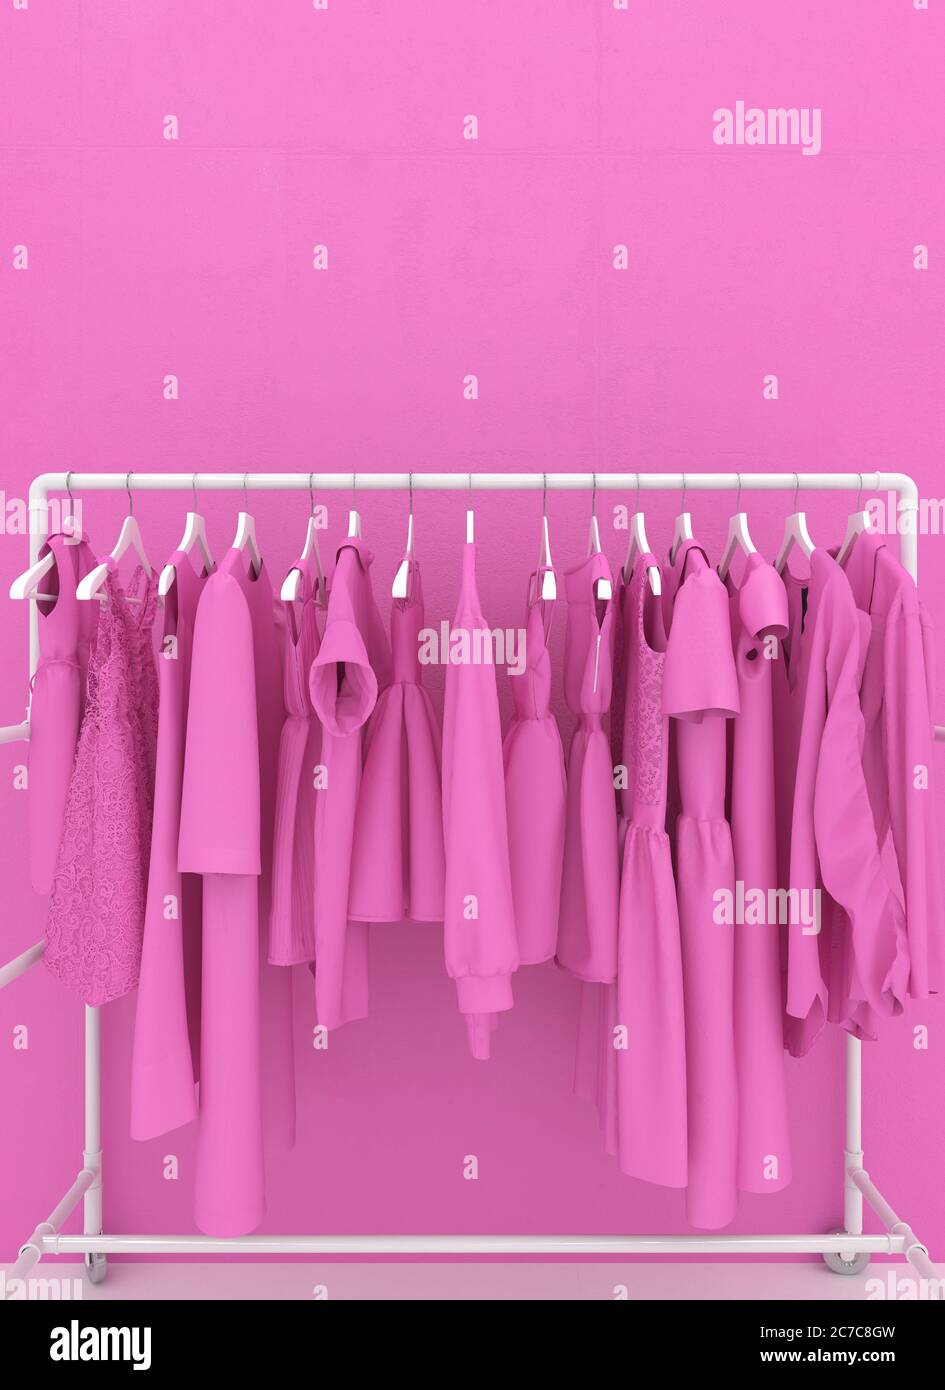 Hanger with pink women's clothing against the background of a pink wall. Monotonous pink clothes. Creative conceptual illustration with copy space. 3D Stock Photo